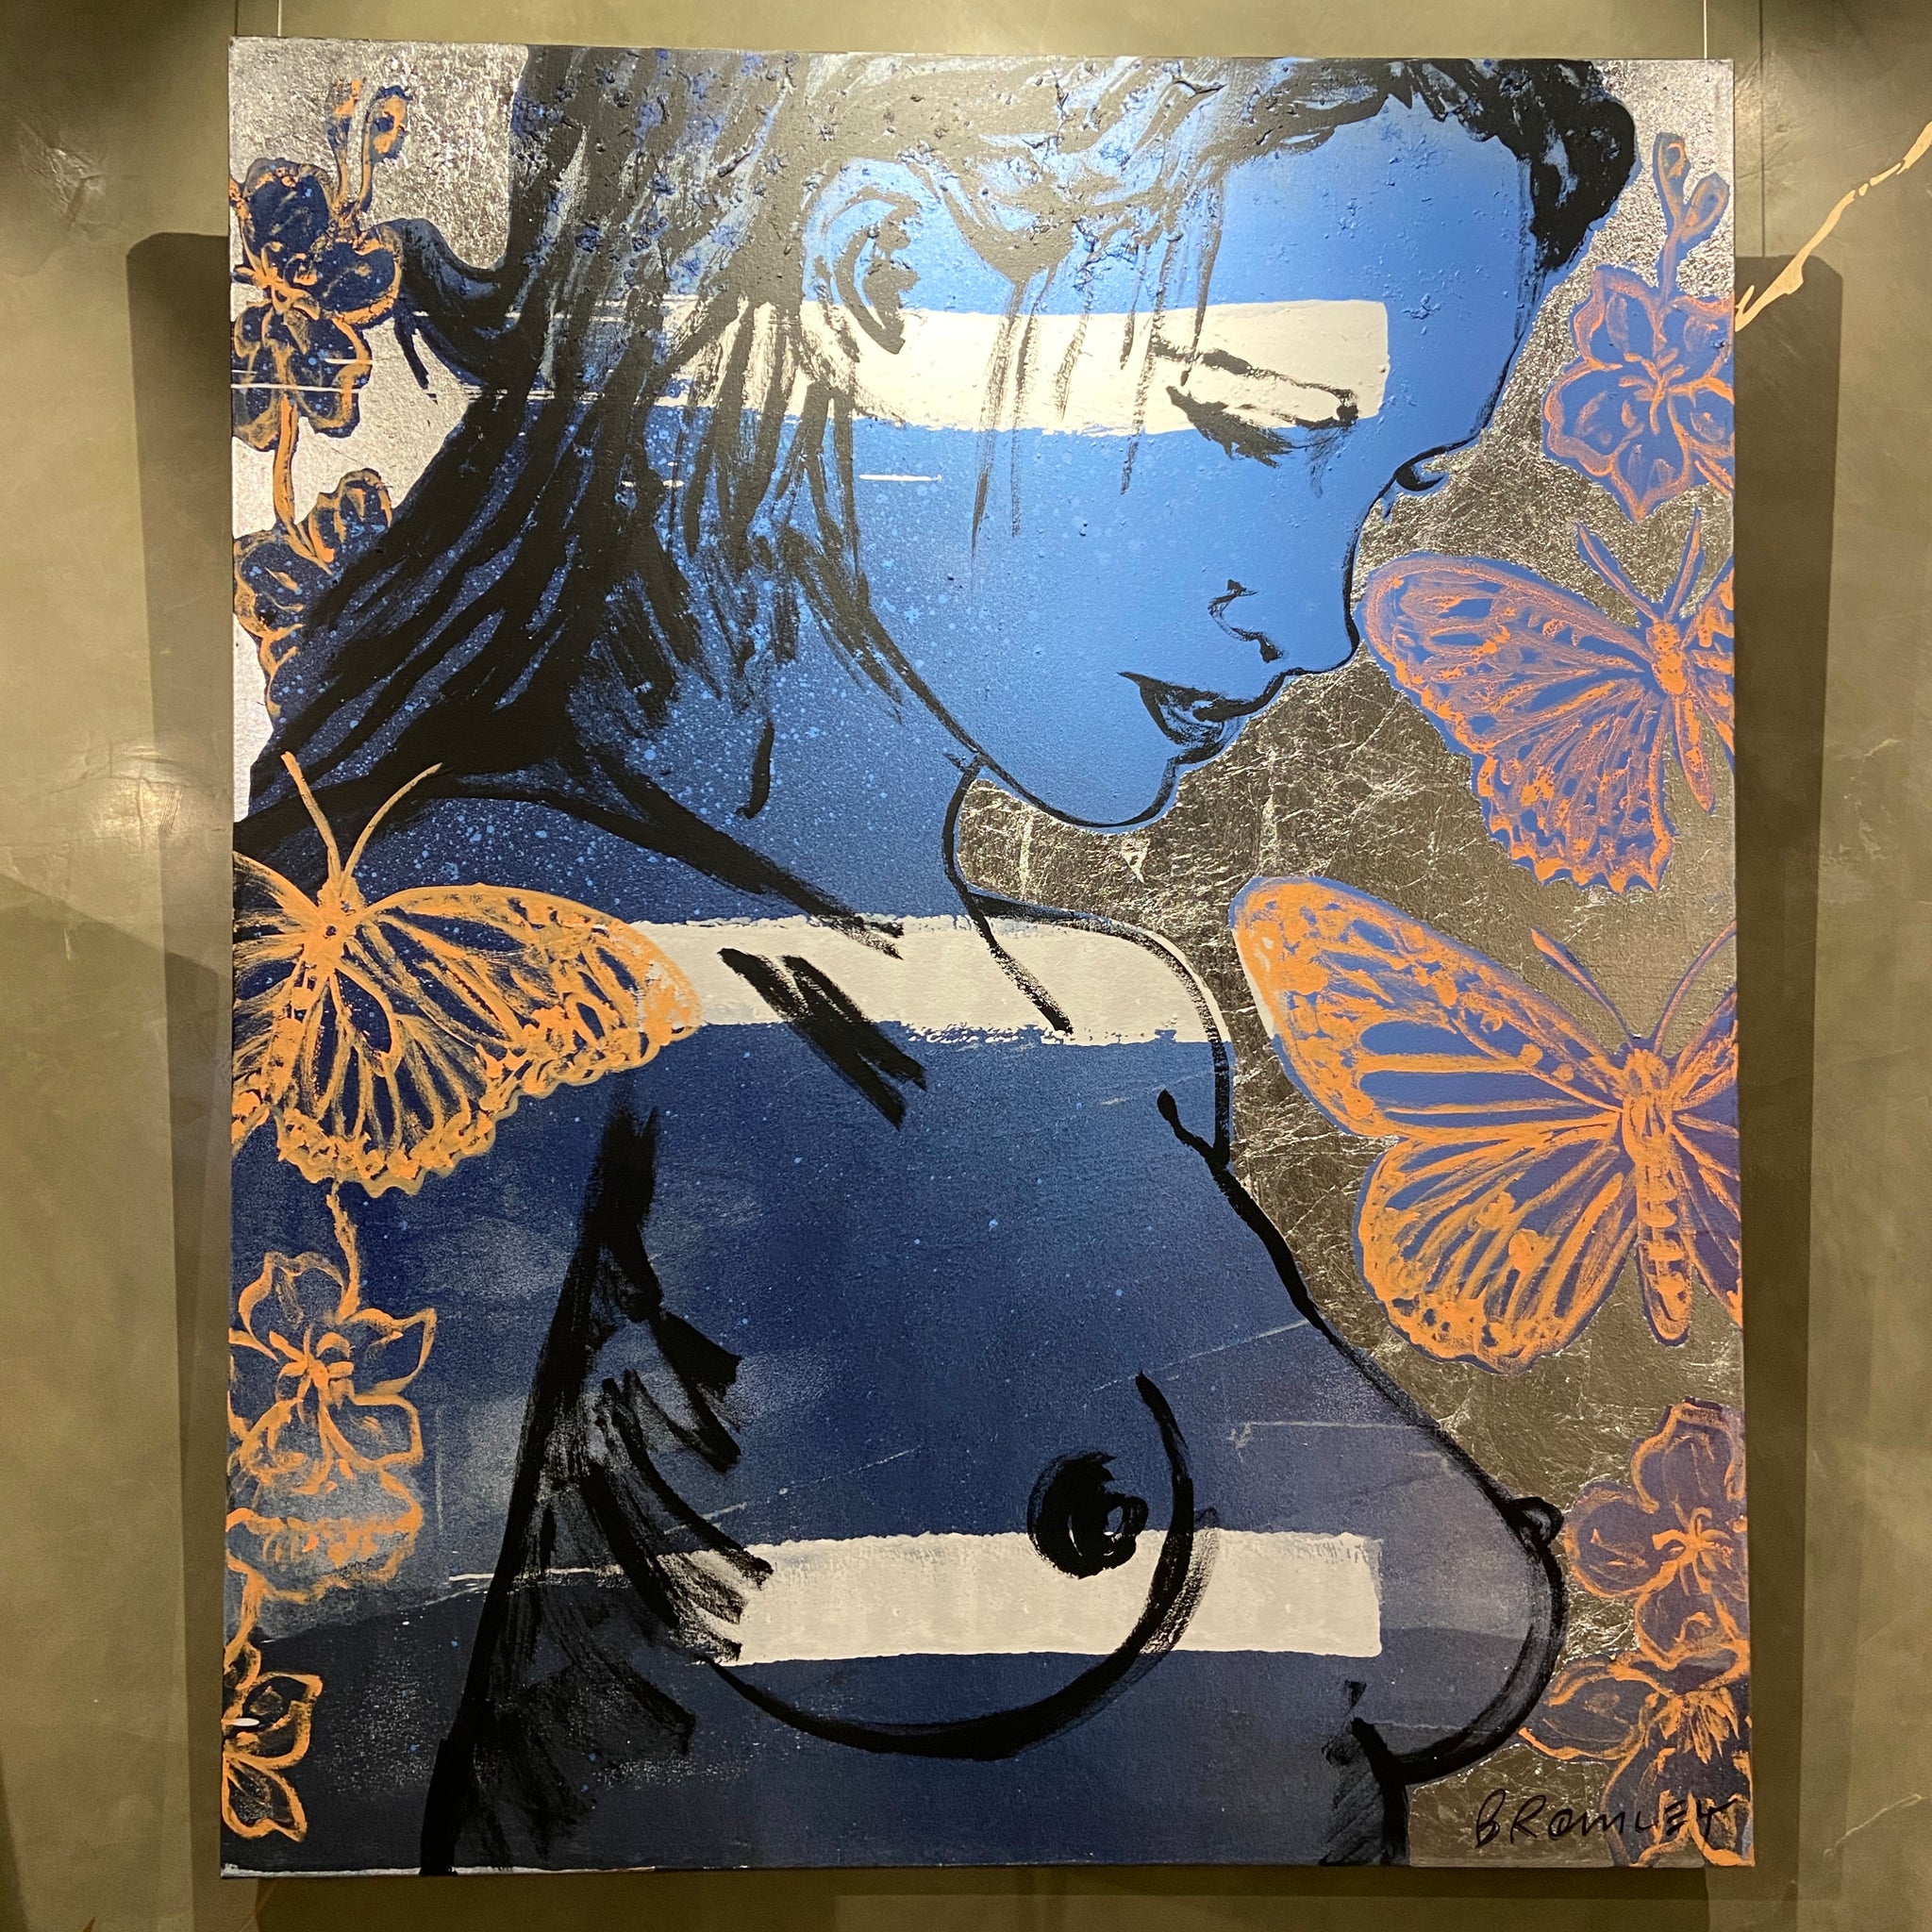 ‘Romy with Butterflies’ David Bromley. Acrylic on canvas with silver metal leaf gilding. 180 x 150cm